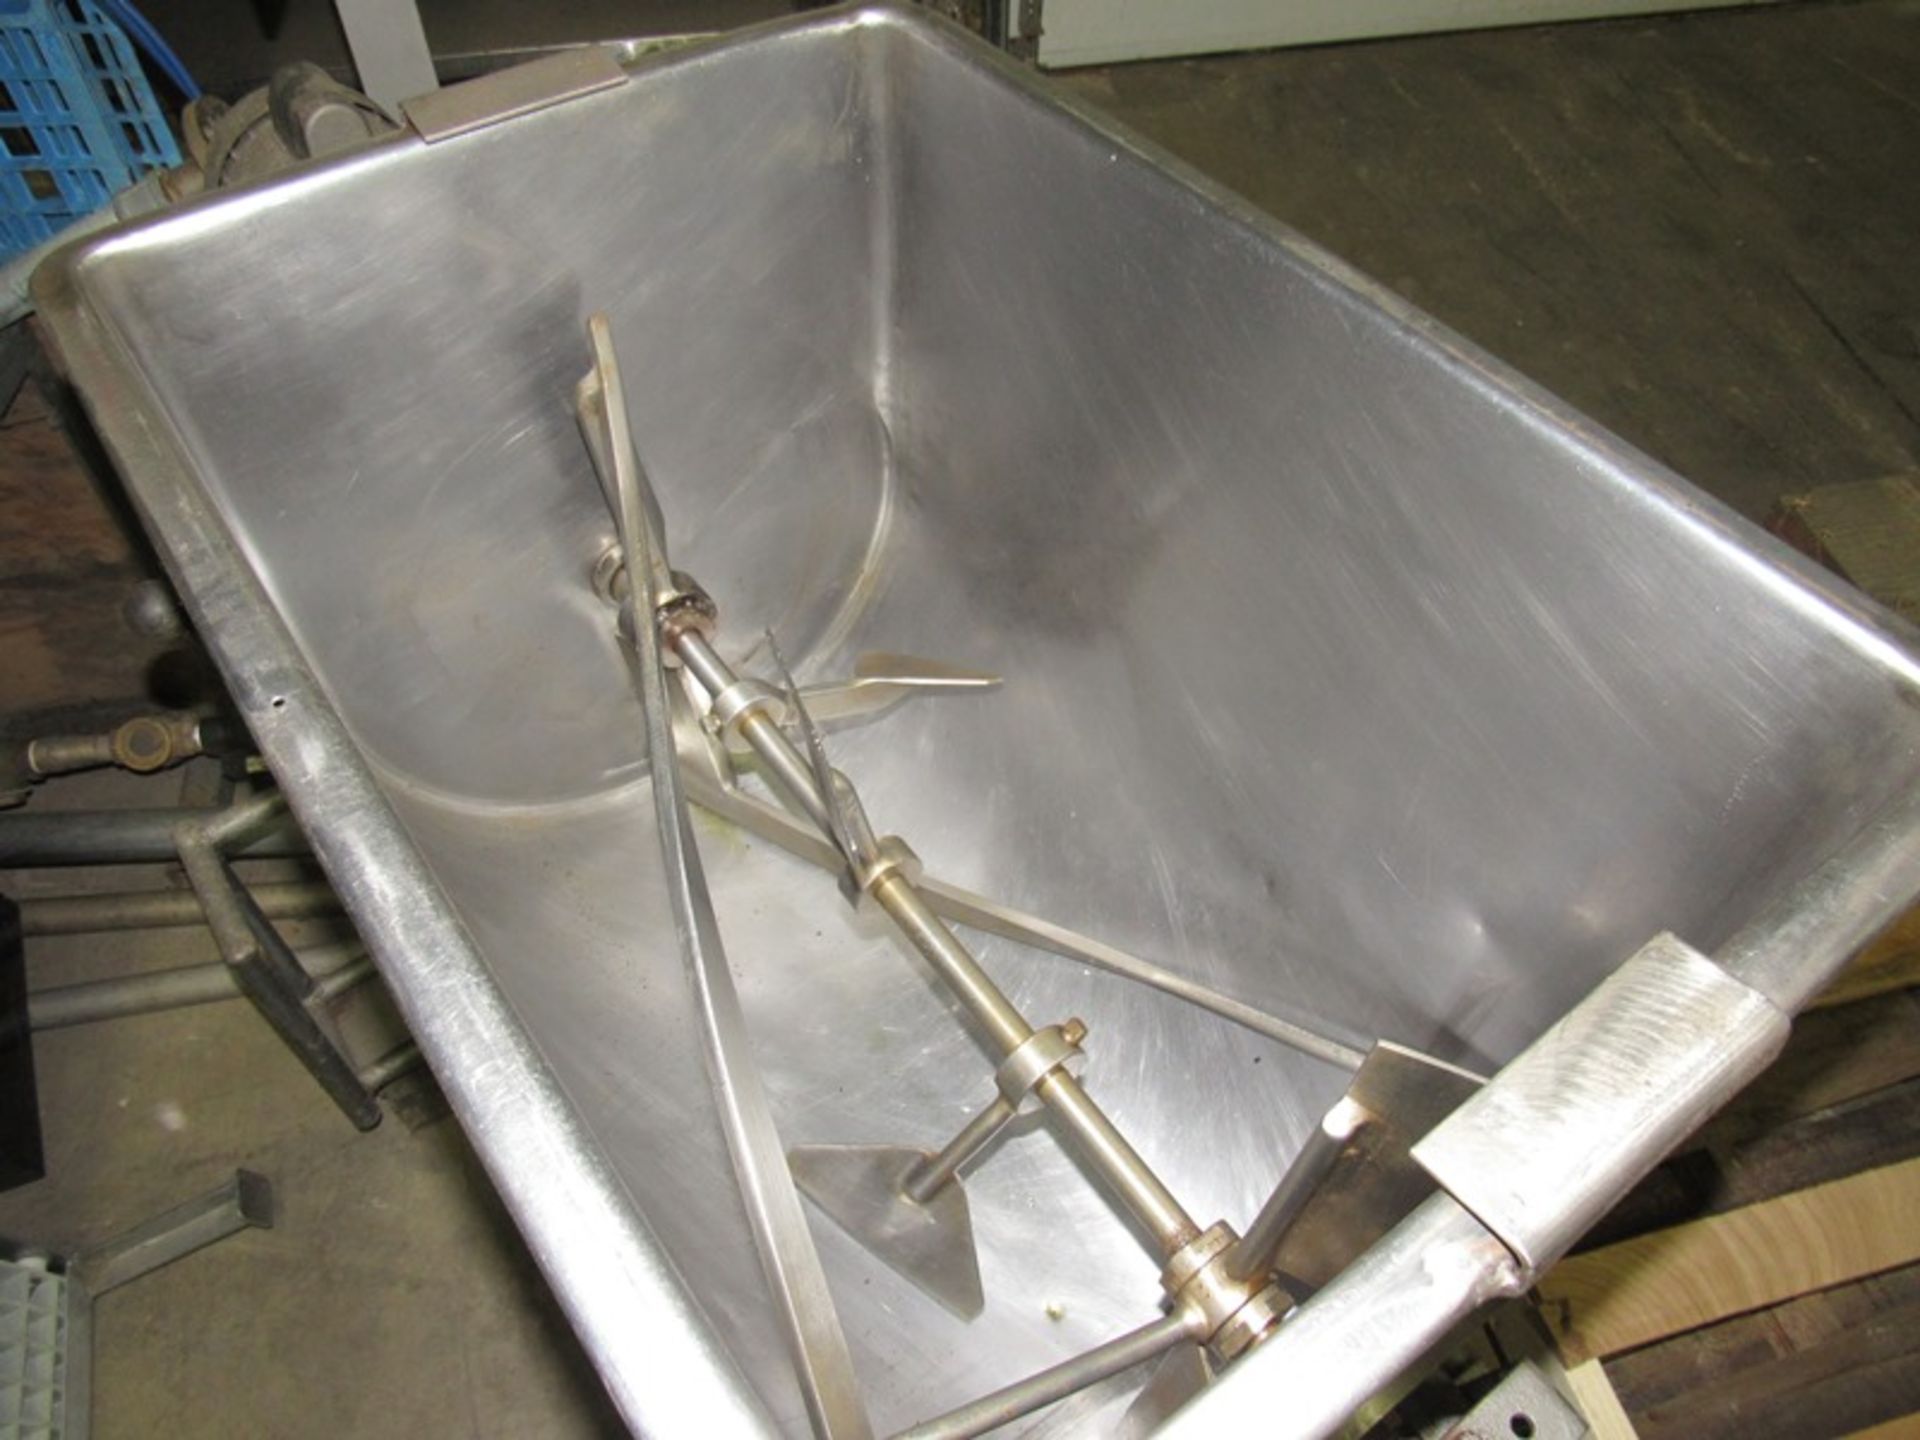 Portable Mixer, 16" W X 24" L X 18" D, stainless steel tilt out bowl, 1 h.p., dual voltage motor - Image 6 of 6